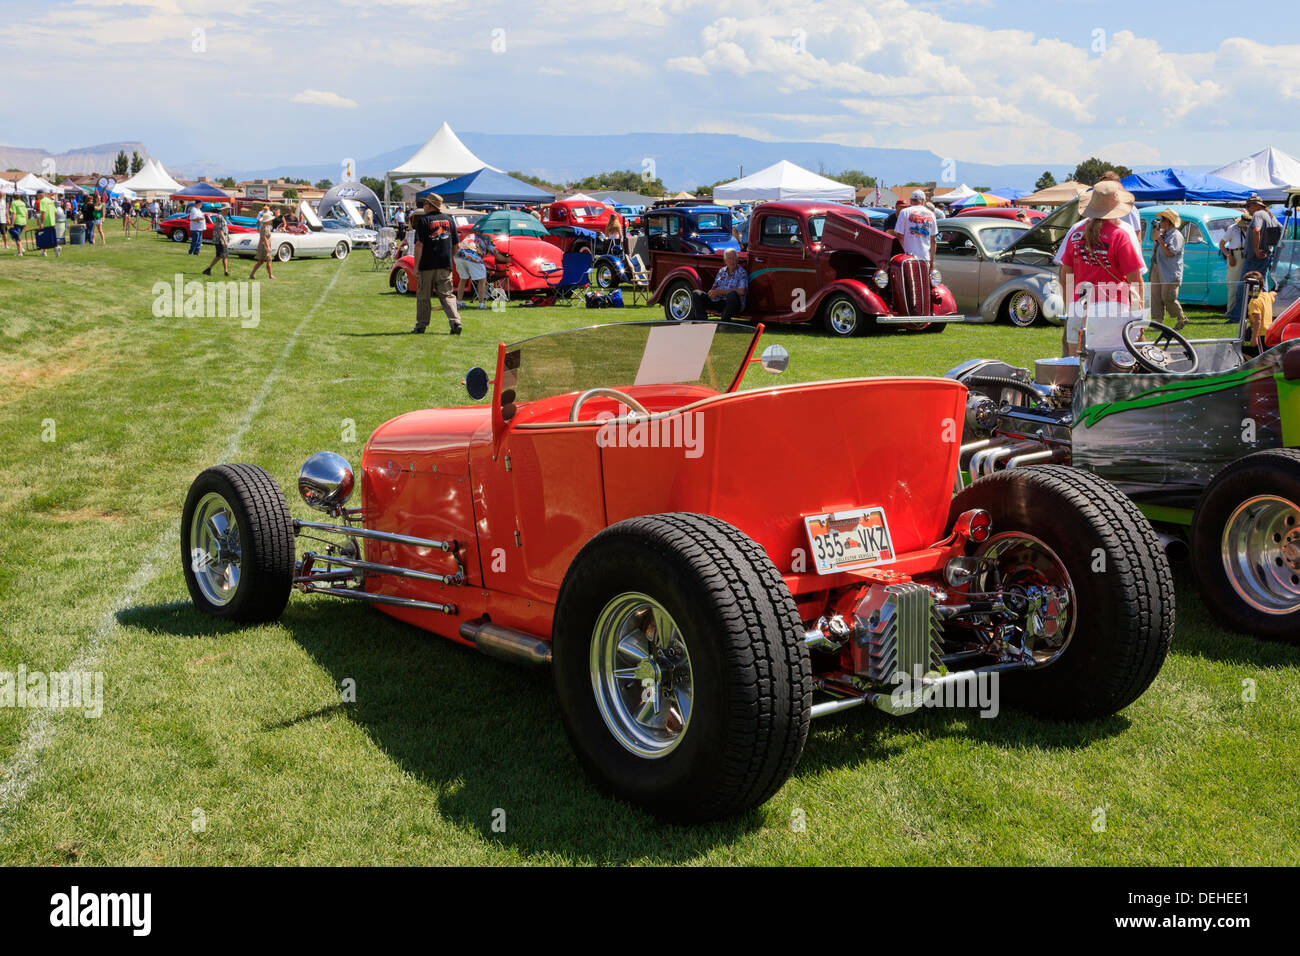 Customised street car on display at a Classic car show, near Grand Junction, Colorado, USA Stock Photo